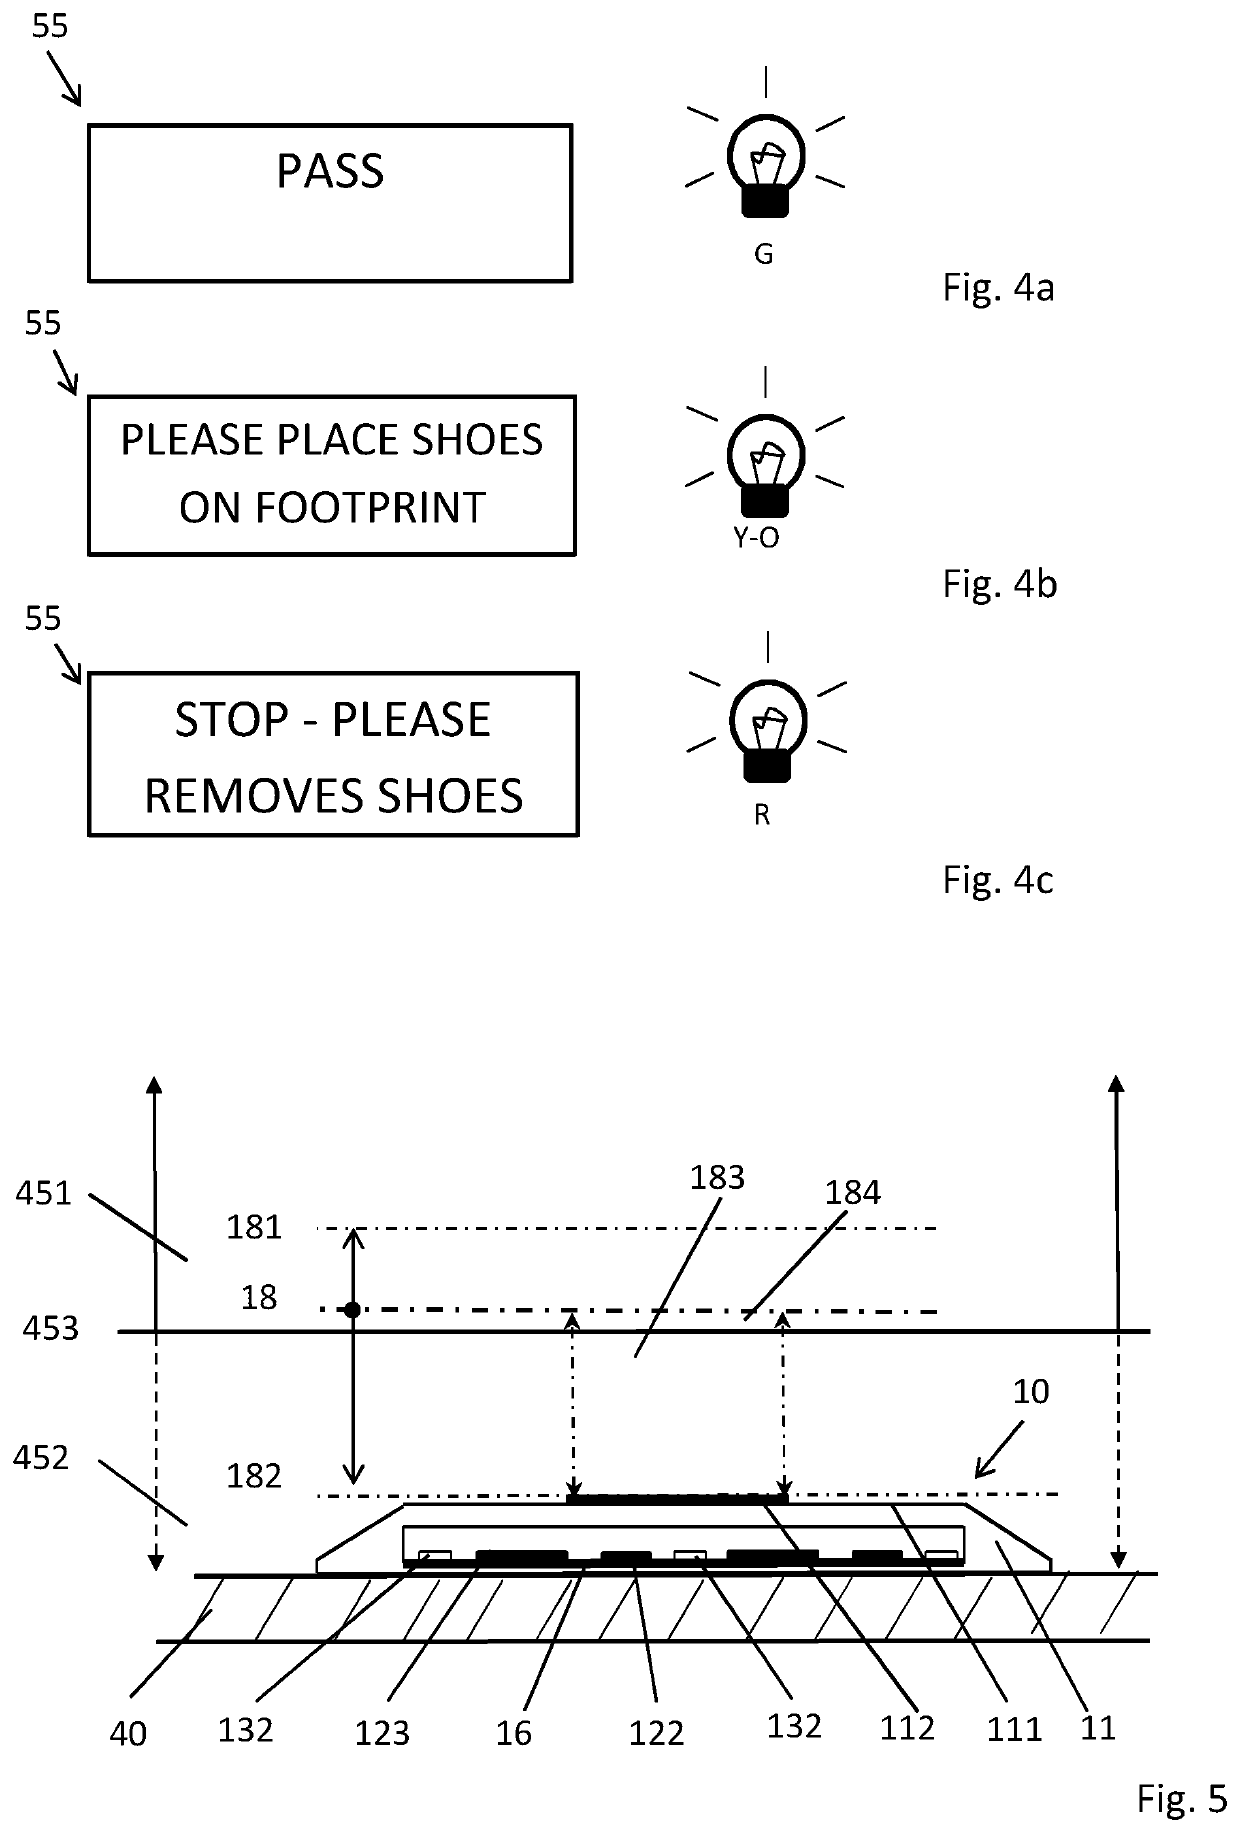 Shoe scanning system for full-body scanner and method for retrofitting a full-body scanner